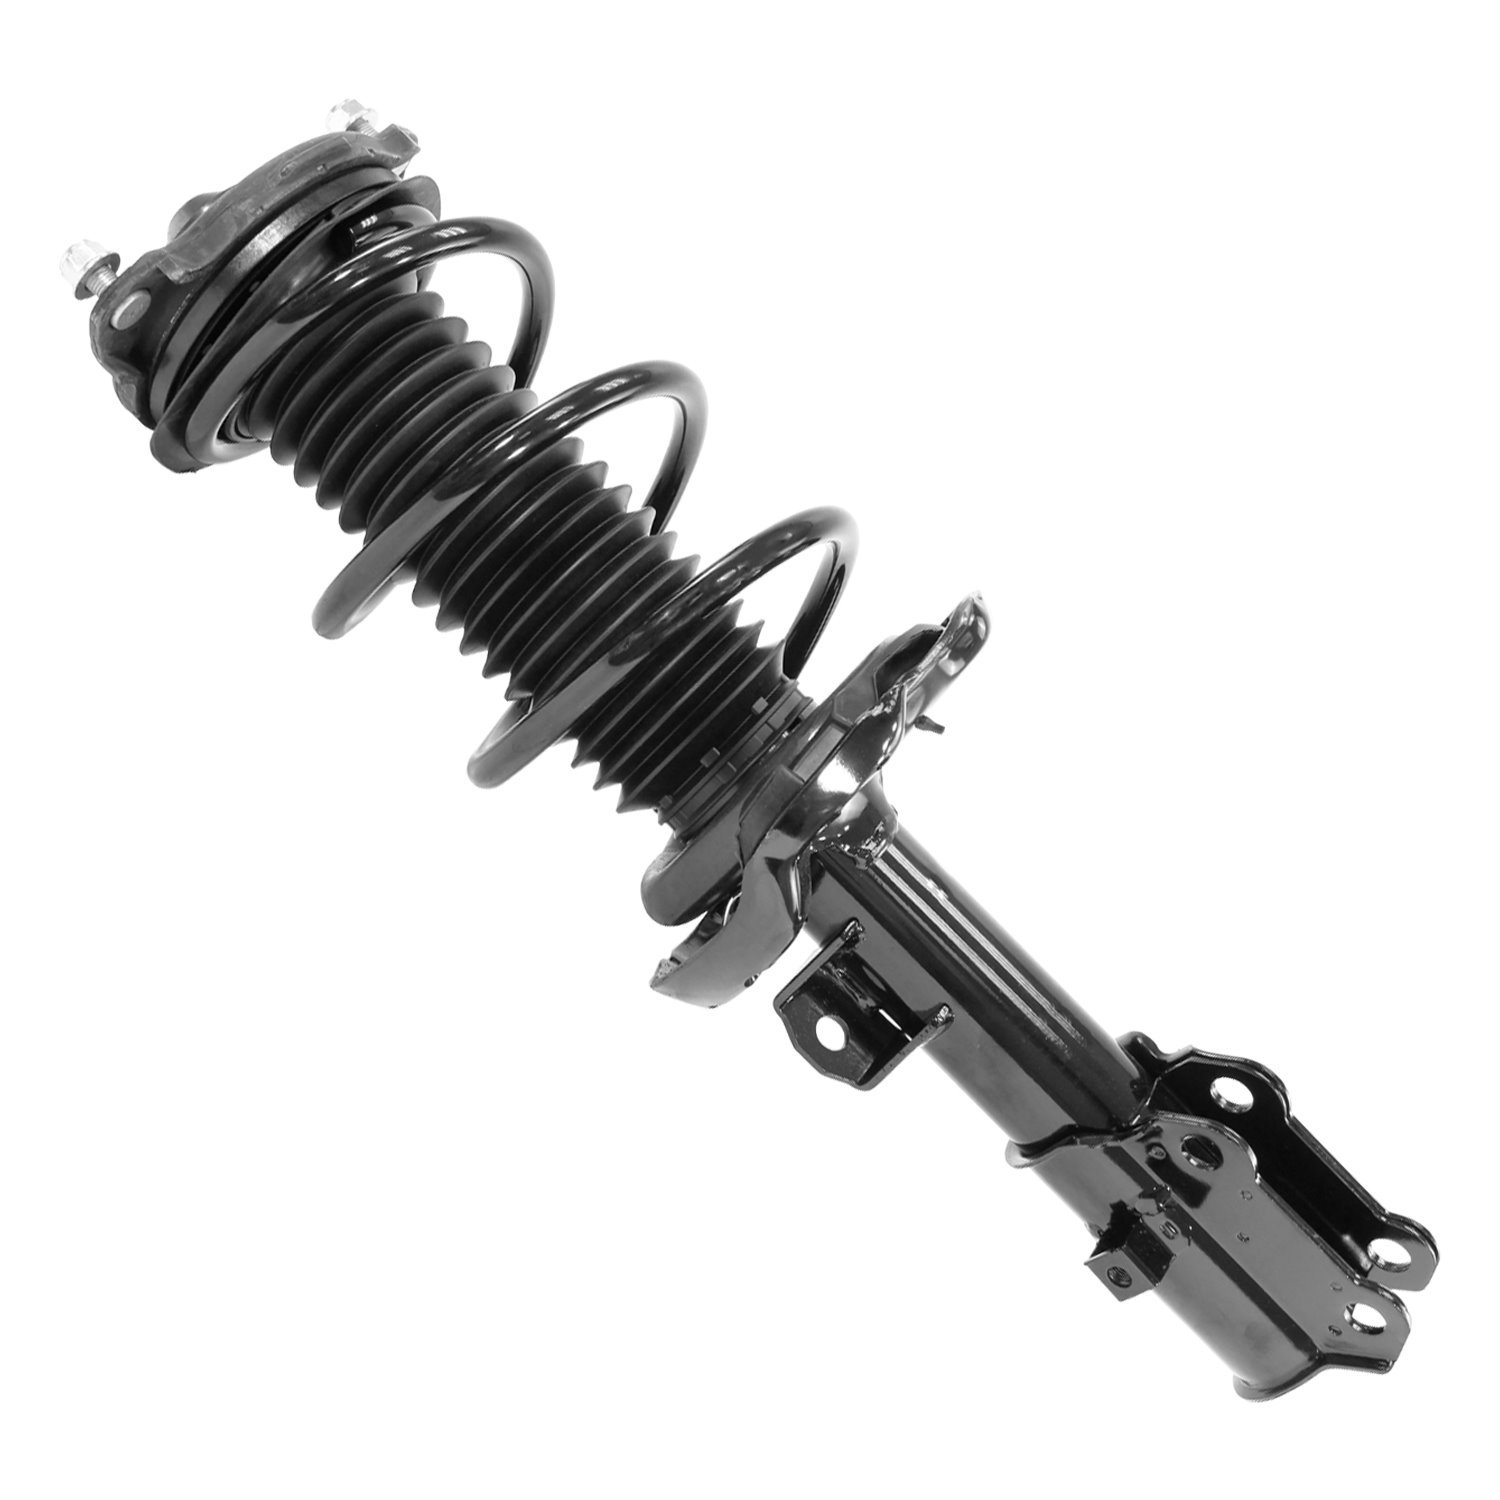 13583 Front Suspension Strut & Coil Spring Assemby Fits Select Hyundai Elantra